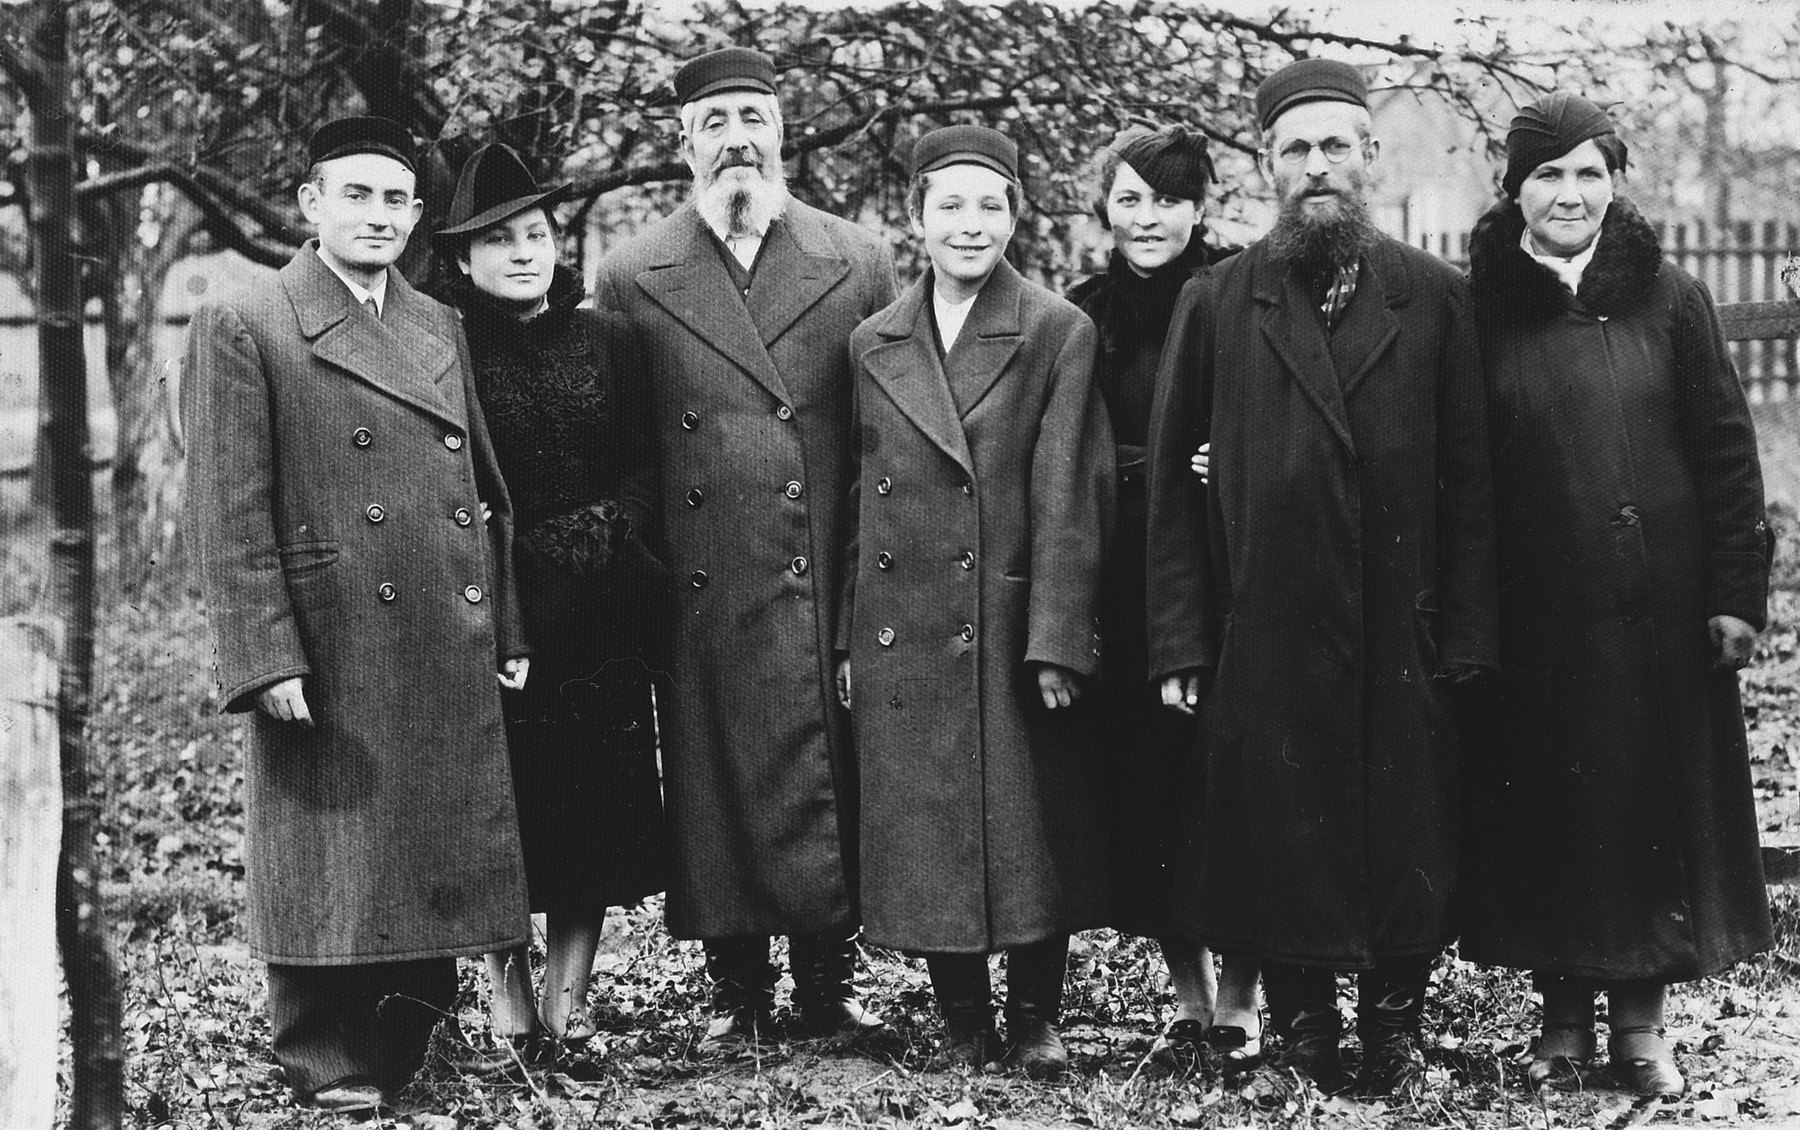 Group portrait of a family of religious Jews in prewar Zelow, Poland.